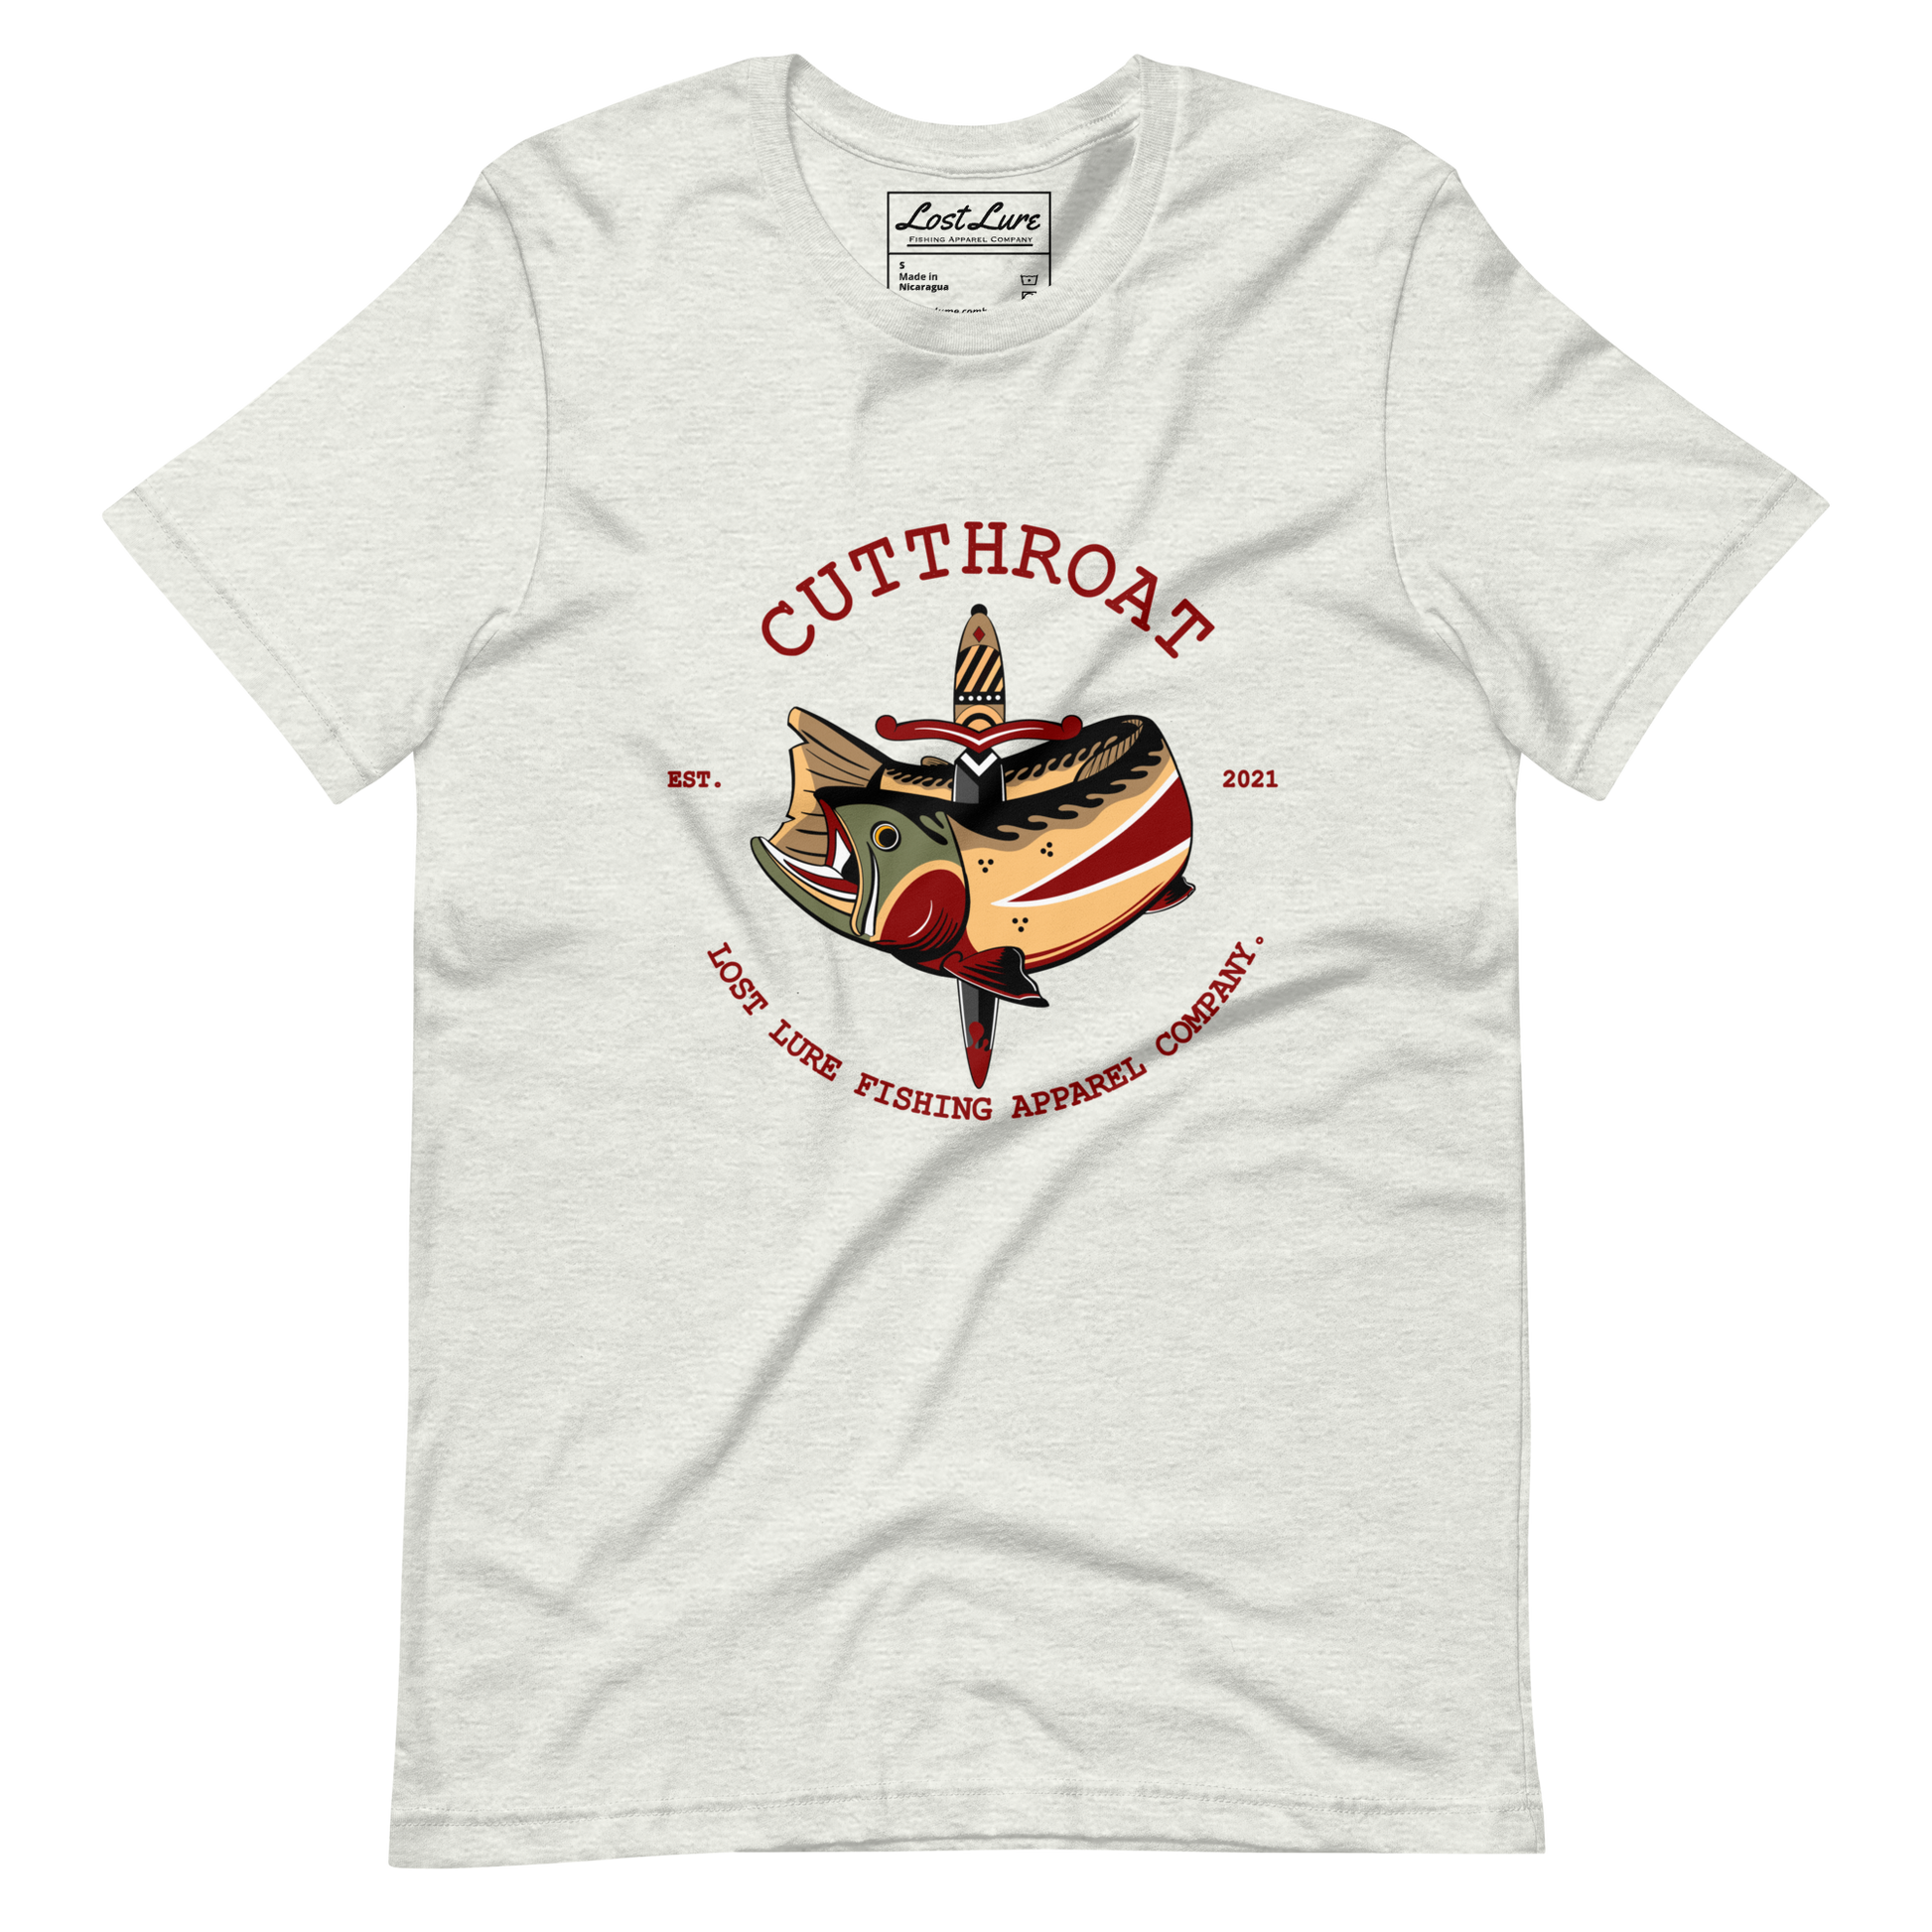 Cutthroat Trout fishing shirt. It’s an American traditional style design with a cutthroat trout and a dagger. The shirt reads Cutthroat trout, est. 2021, lost lure fishing apparel company. The fishing design is on the front of the shirt, crème color 